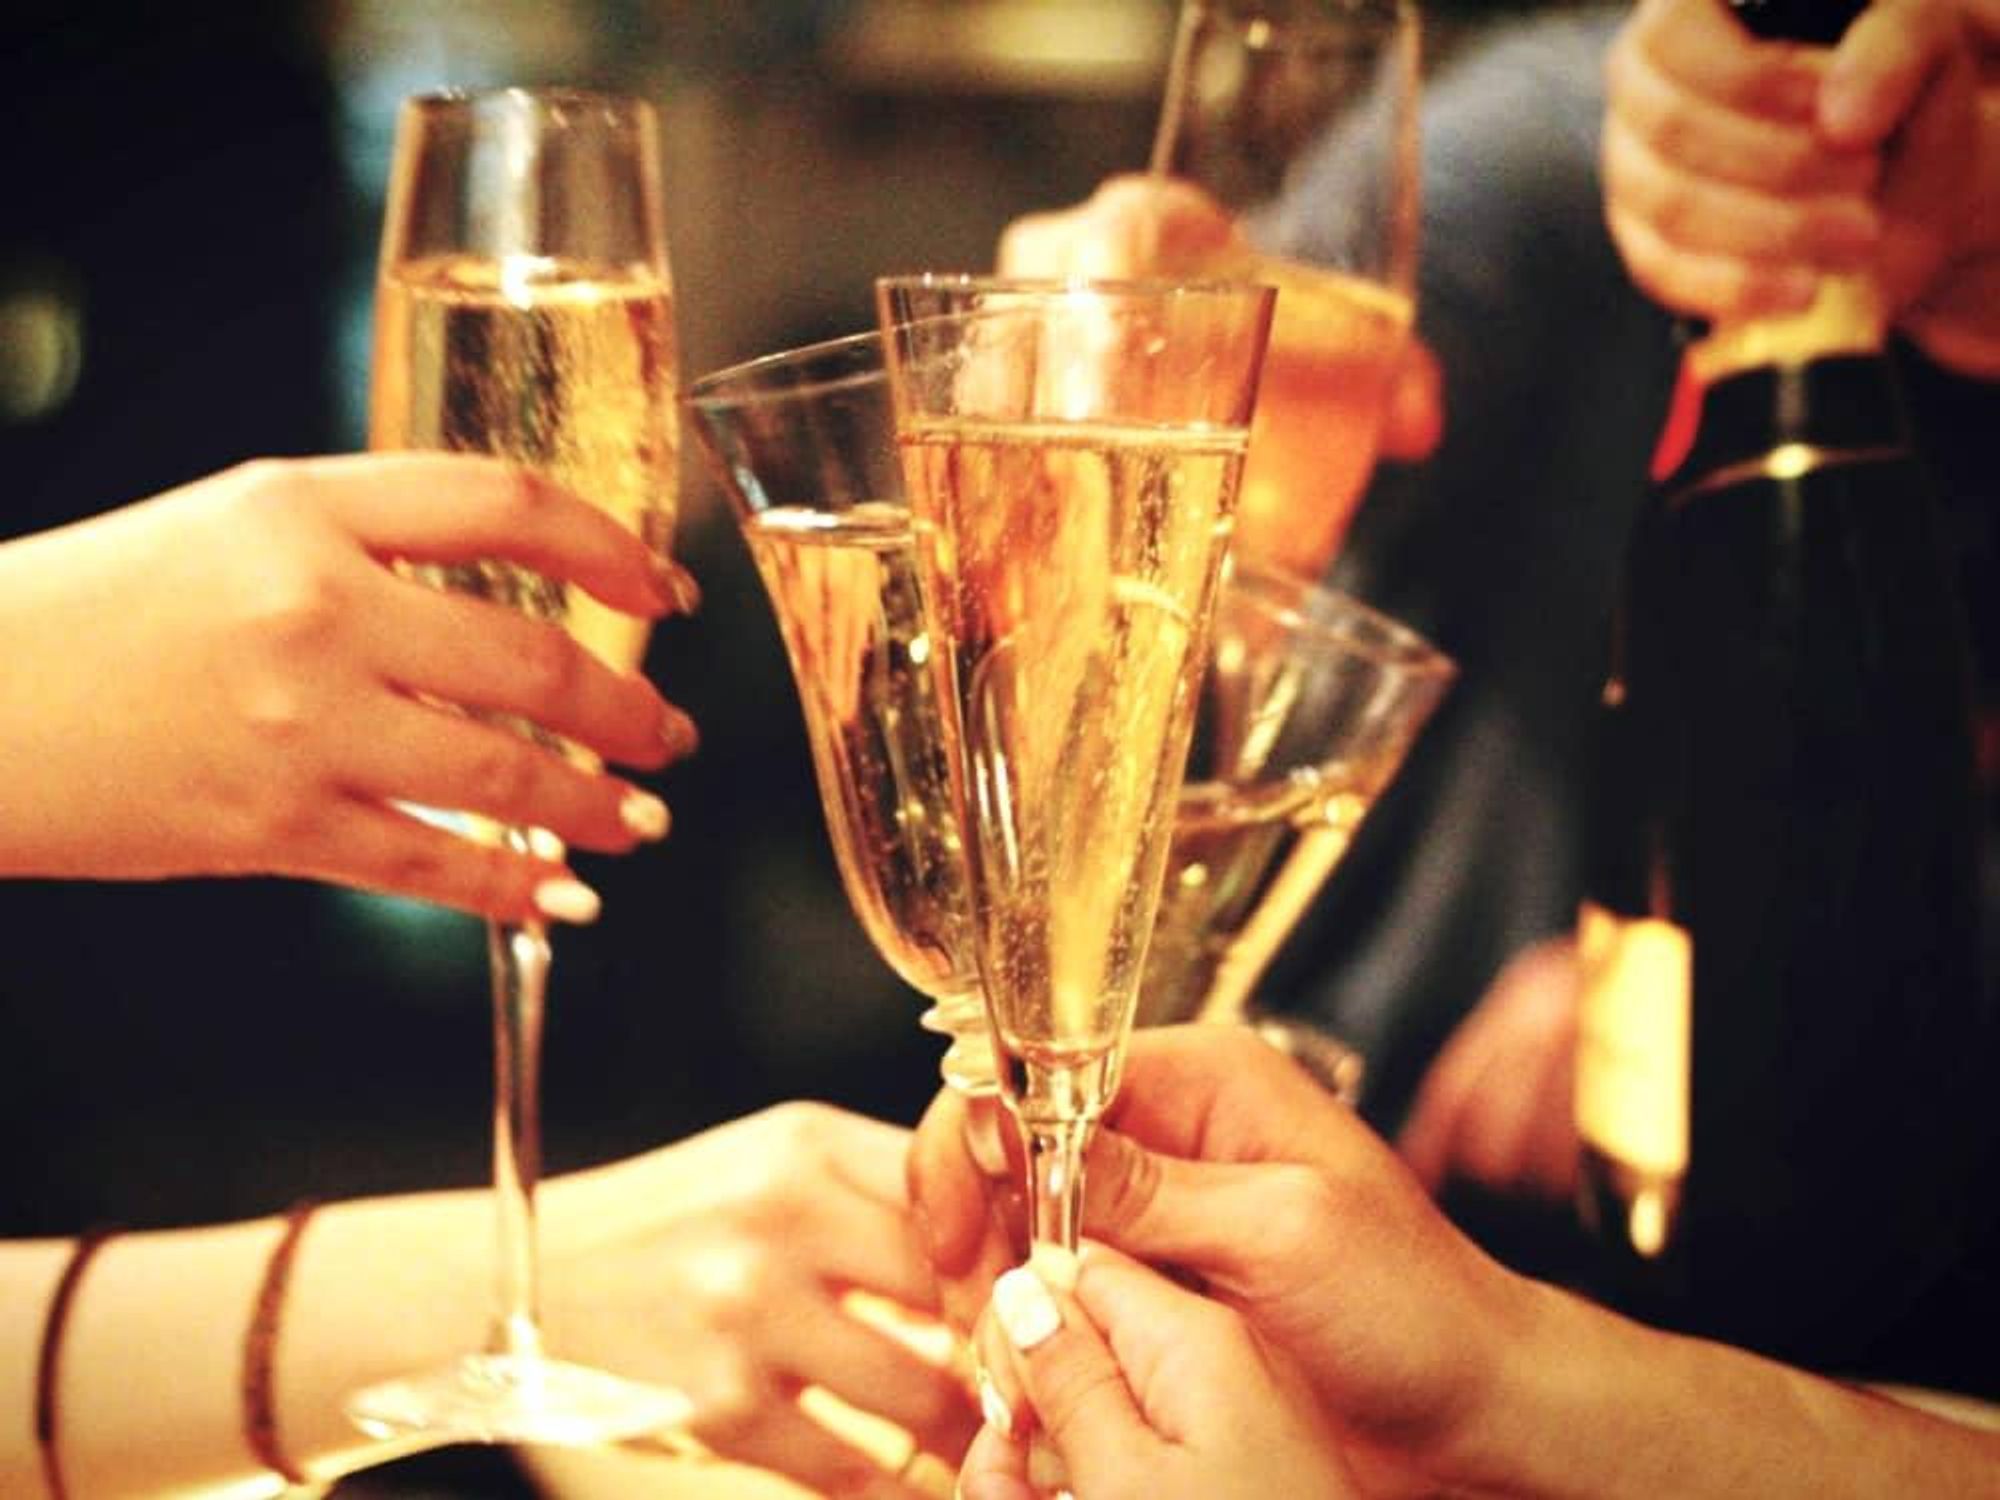 https://dallas.culturemap.com/media-library/stock-photo-of-friends-toasting-champagne.jpg?id=31497194&width=2000&height=1500&quality=85&coordinates=0%2C0%2C0%2C0